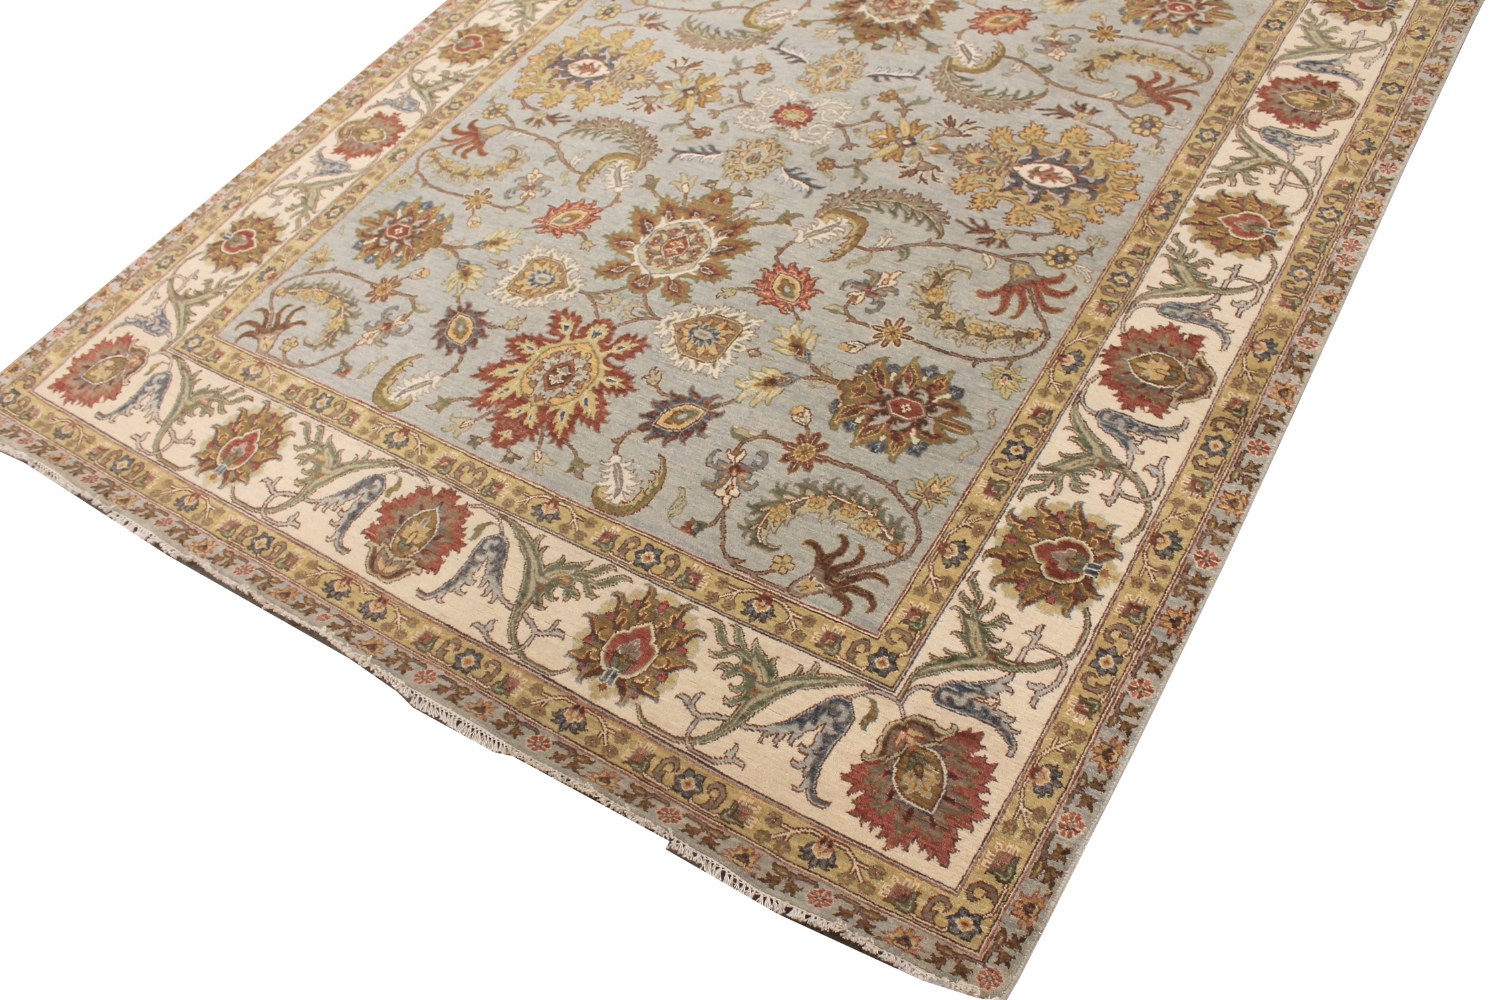 8x10 Traditional Hand Knotted Wool Area Rug - MR028551